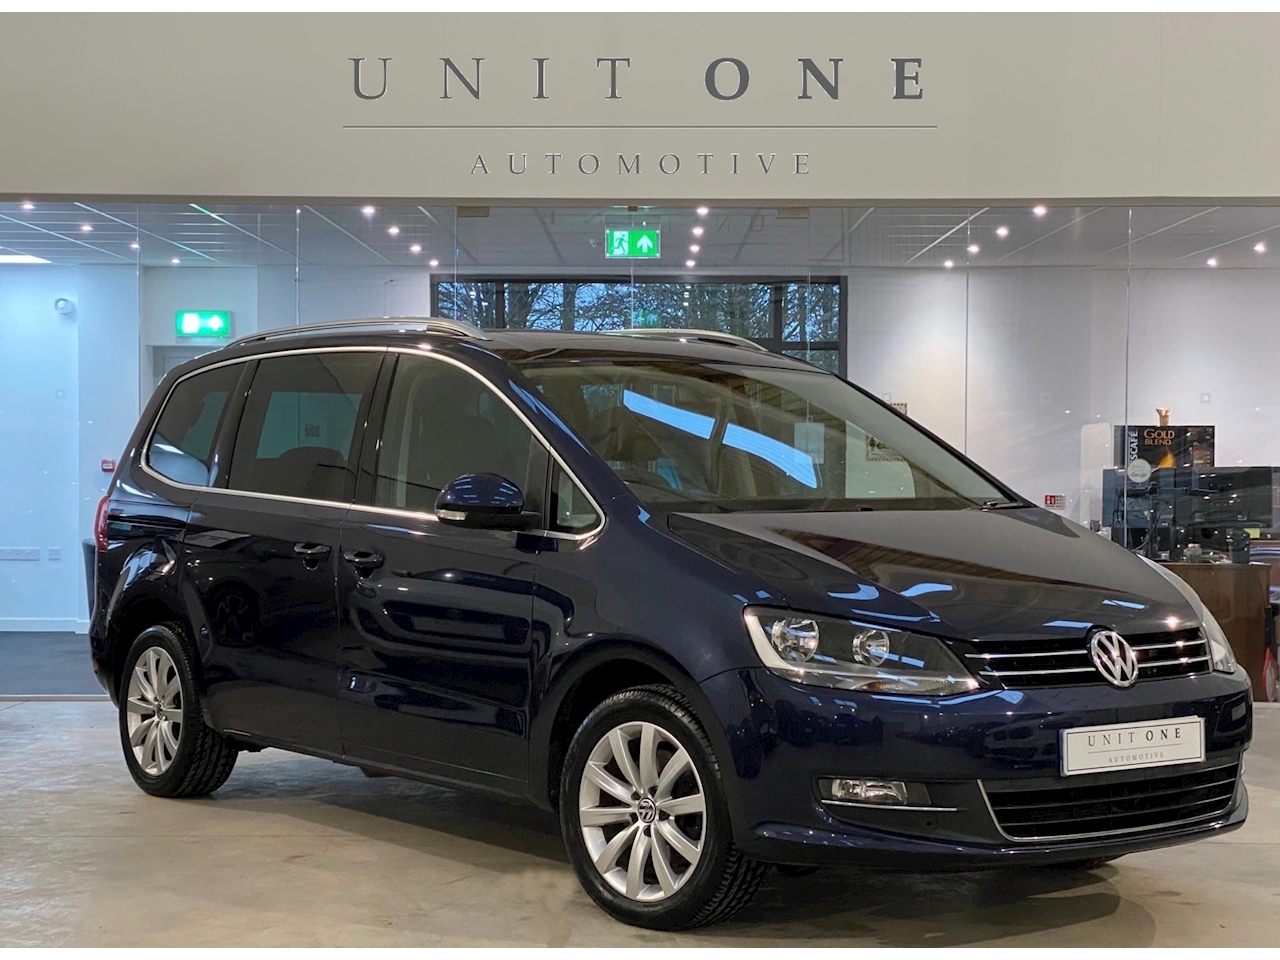 Used 2014 Volkswagen Sharan Sel Bluemotion SHARAN SEL BLUEMOTION TDI Mpv  2.0 Manual Diesel For Sale in West Sussex